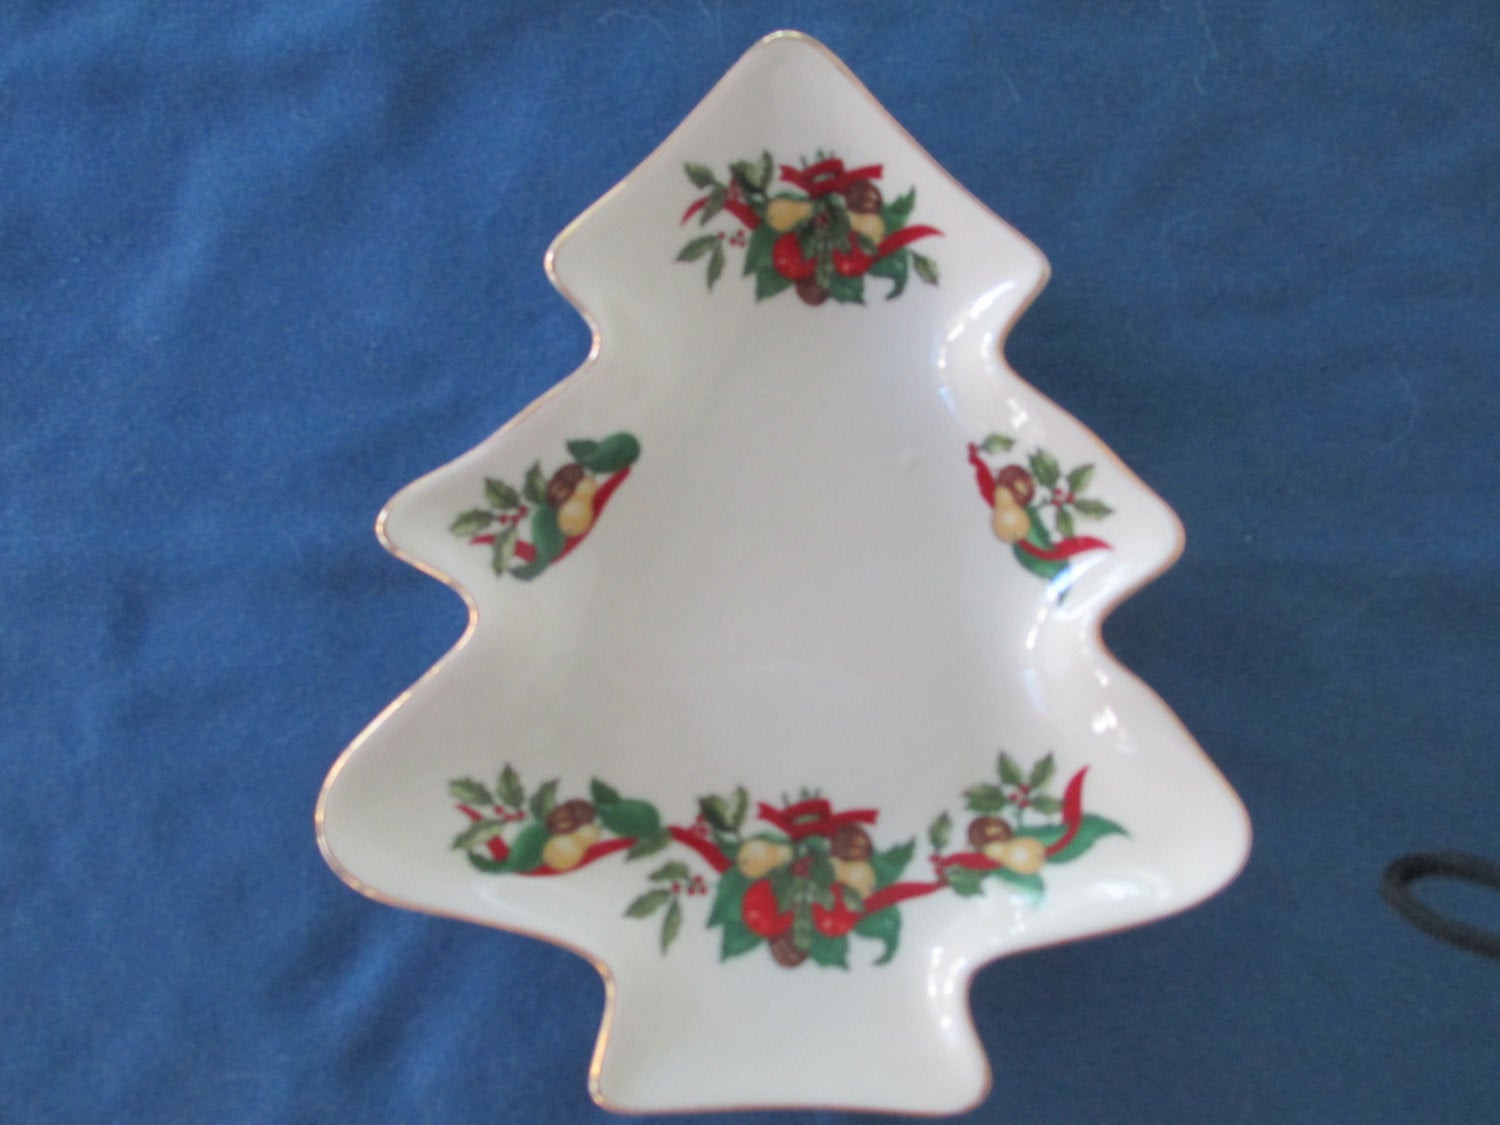 Christmas Tree Candy Dish
 Vintage Christmas Tree Candy Dish Trimmed In Gold by BitofHope